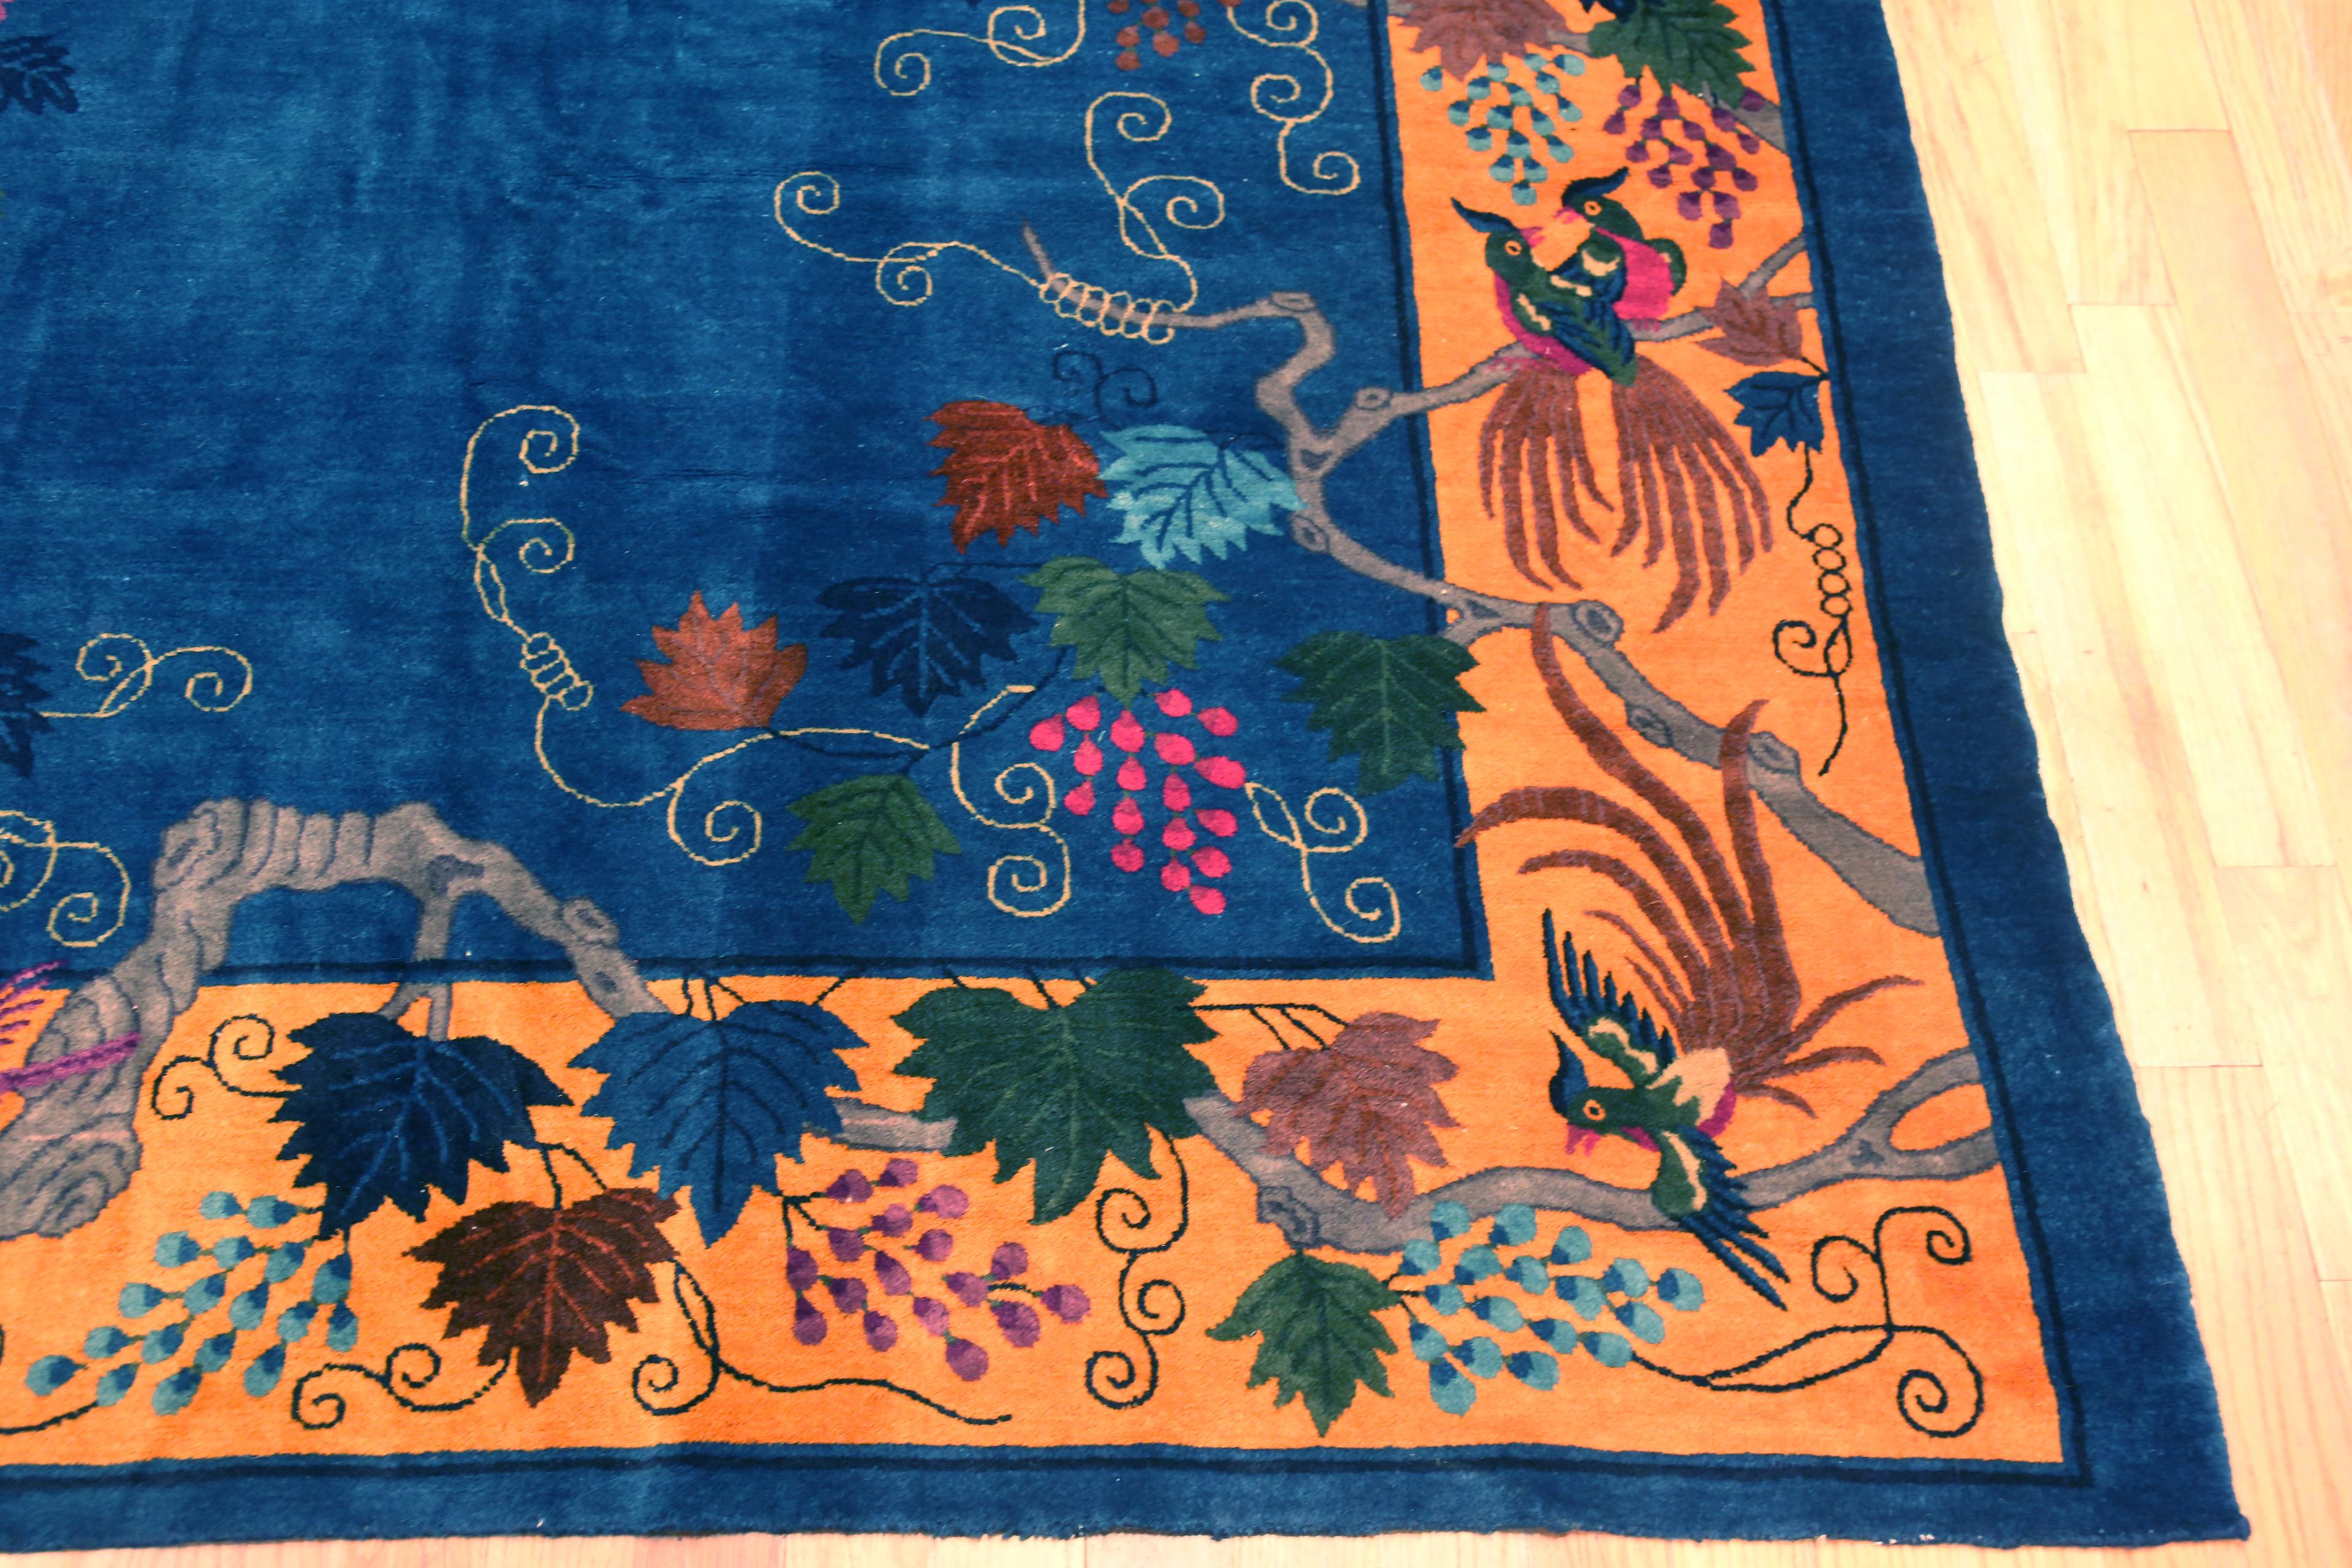 20th Century Eclectic Colorful Antique Chinese Art Deco Peacock Rug 10' x 12'1